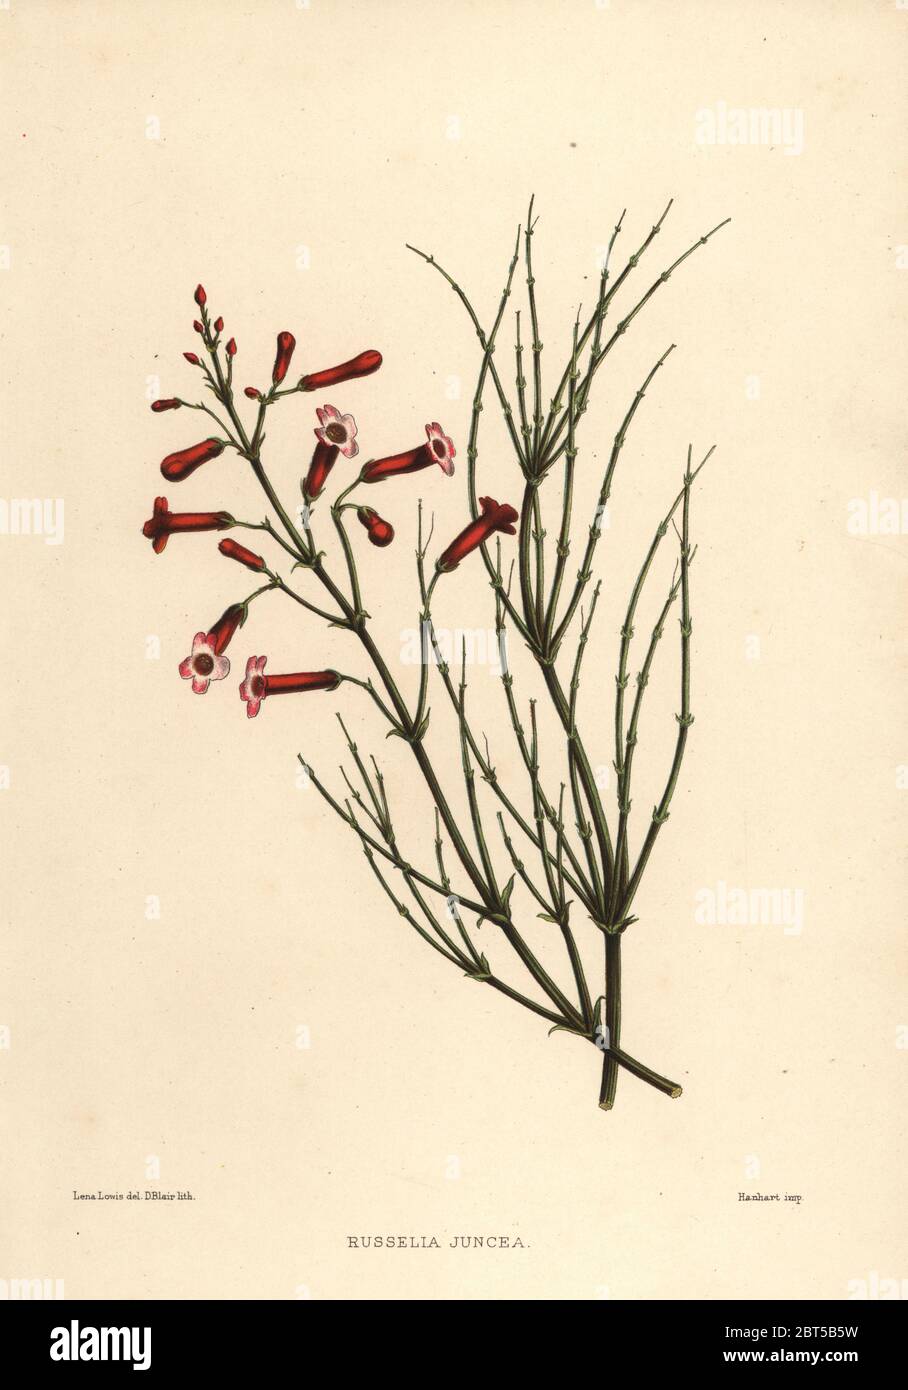 Fountainbush or firecracker plant, Russelia equisetiformis (Russelia juncea). Handcoloured lithograph by D. Blair after an illustration by Lena Lowis from her Familiar Indian Flowers with Coloured Plates, L. Reeve, London, 1878. Lena Lowis, formerly Selena Caroline Shakespear (1845-1919), was a British woman artist who traveled to India with her husband Lt.-Col. Ninian Lowis. Stock Photo